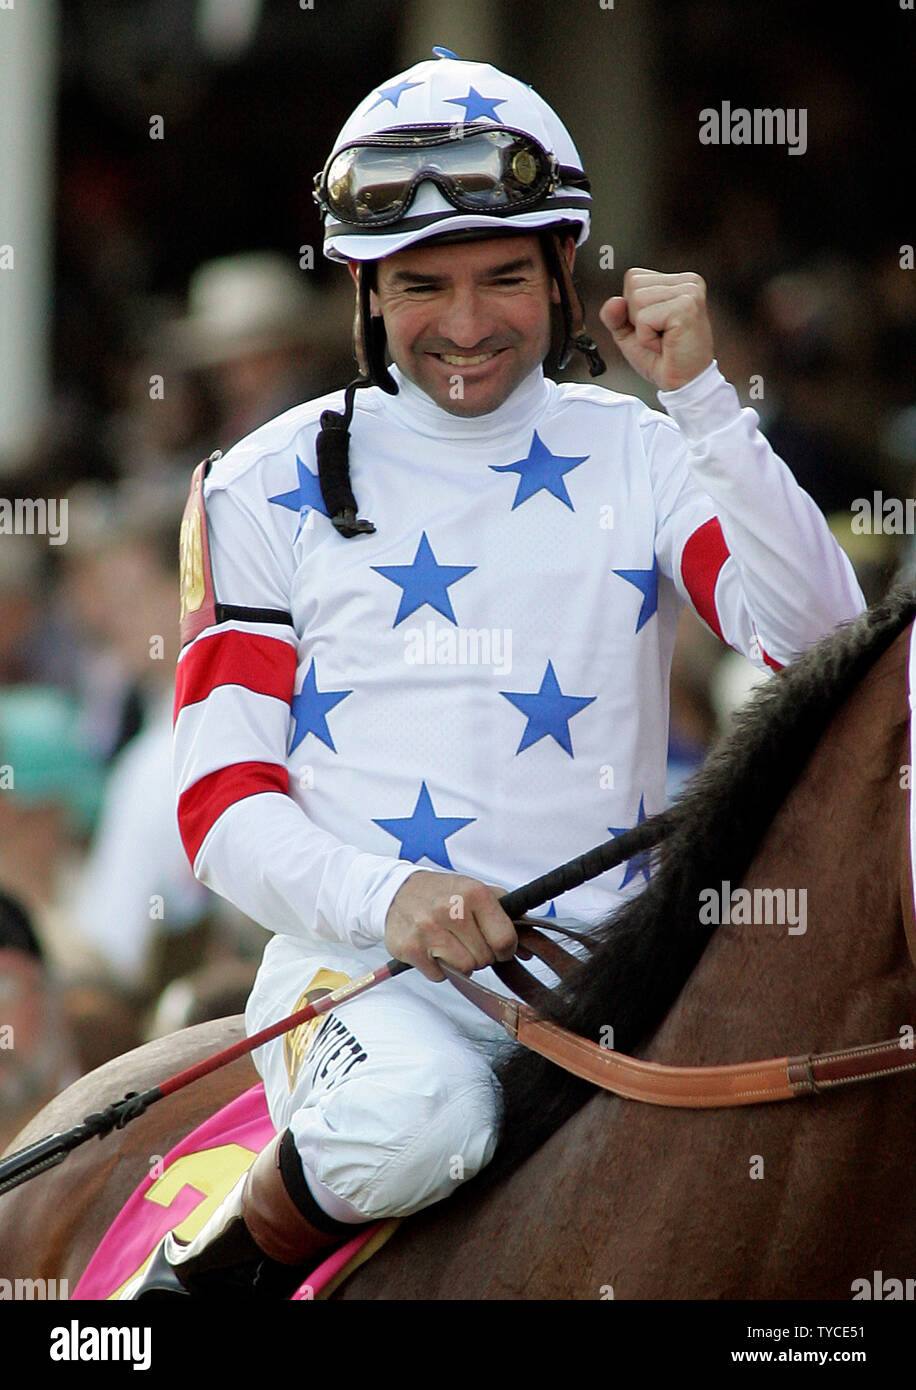 Kent Desormeaux aboard Big Brown, celebrates winning the 134th running of the Kentucky Derby at Churchill Downs in Louisville, Kentucky on May 3, 2008. (UPI Photo/Frank Polich) Stock Photo